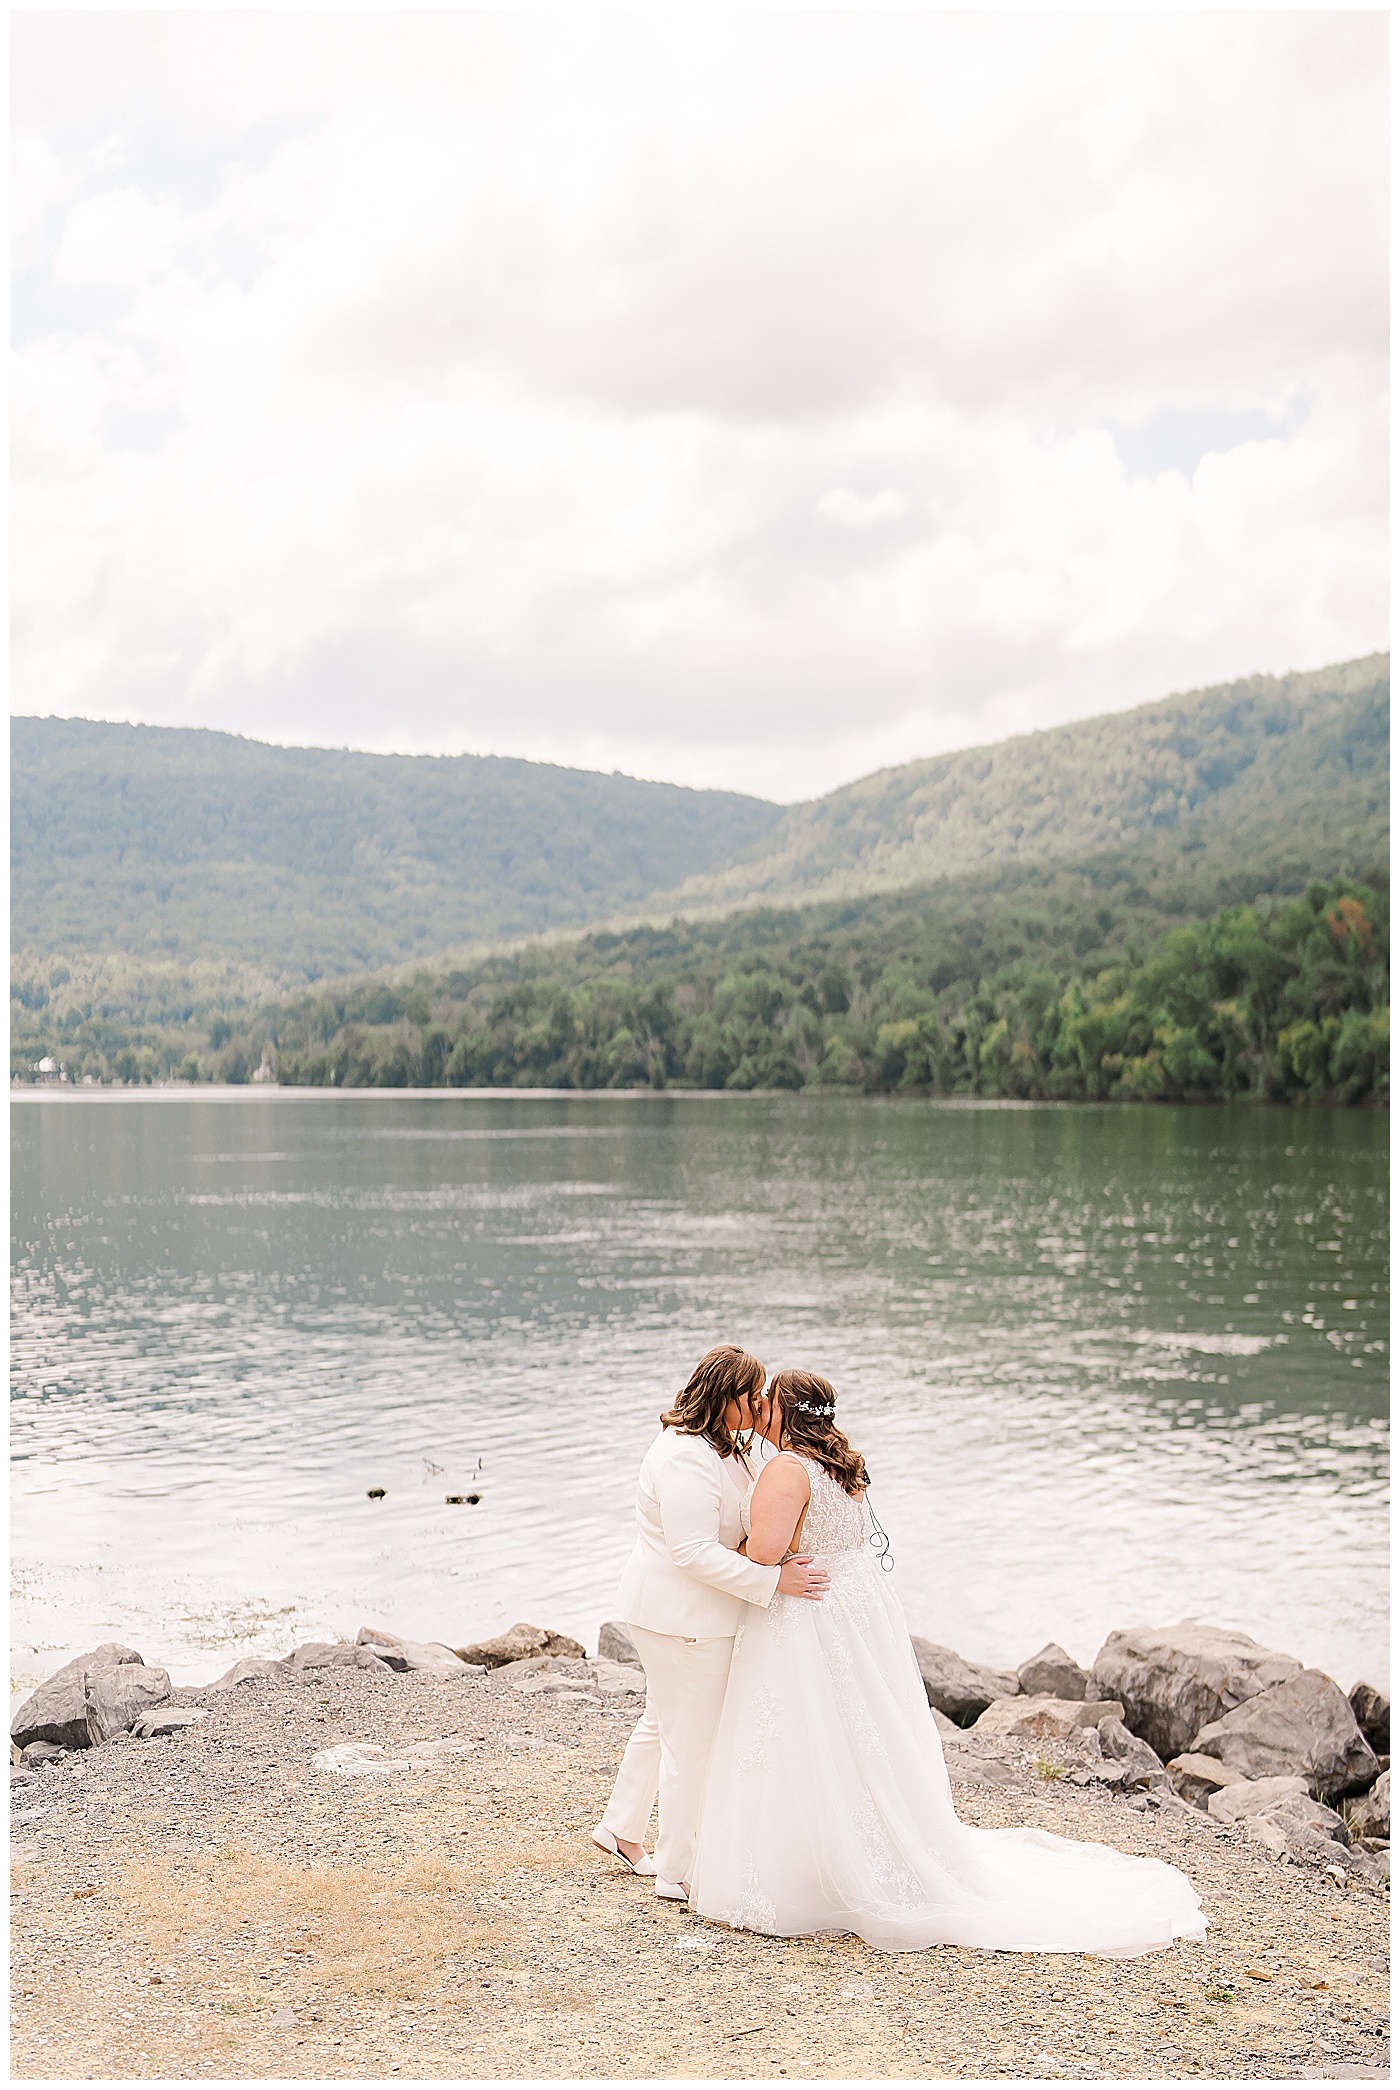 Kissing Couple by the Lake